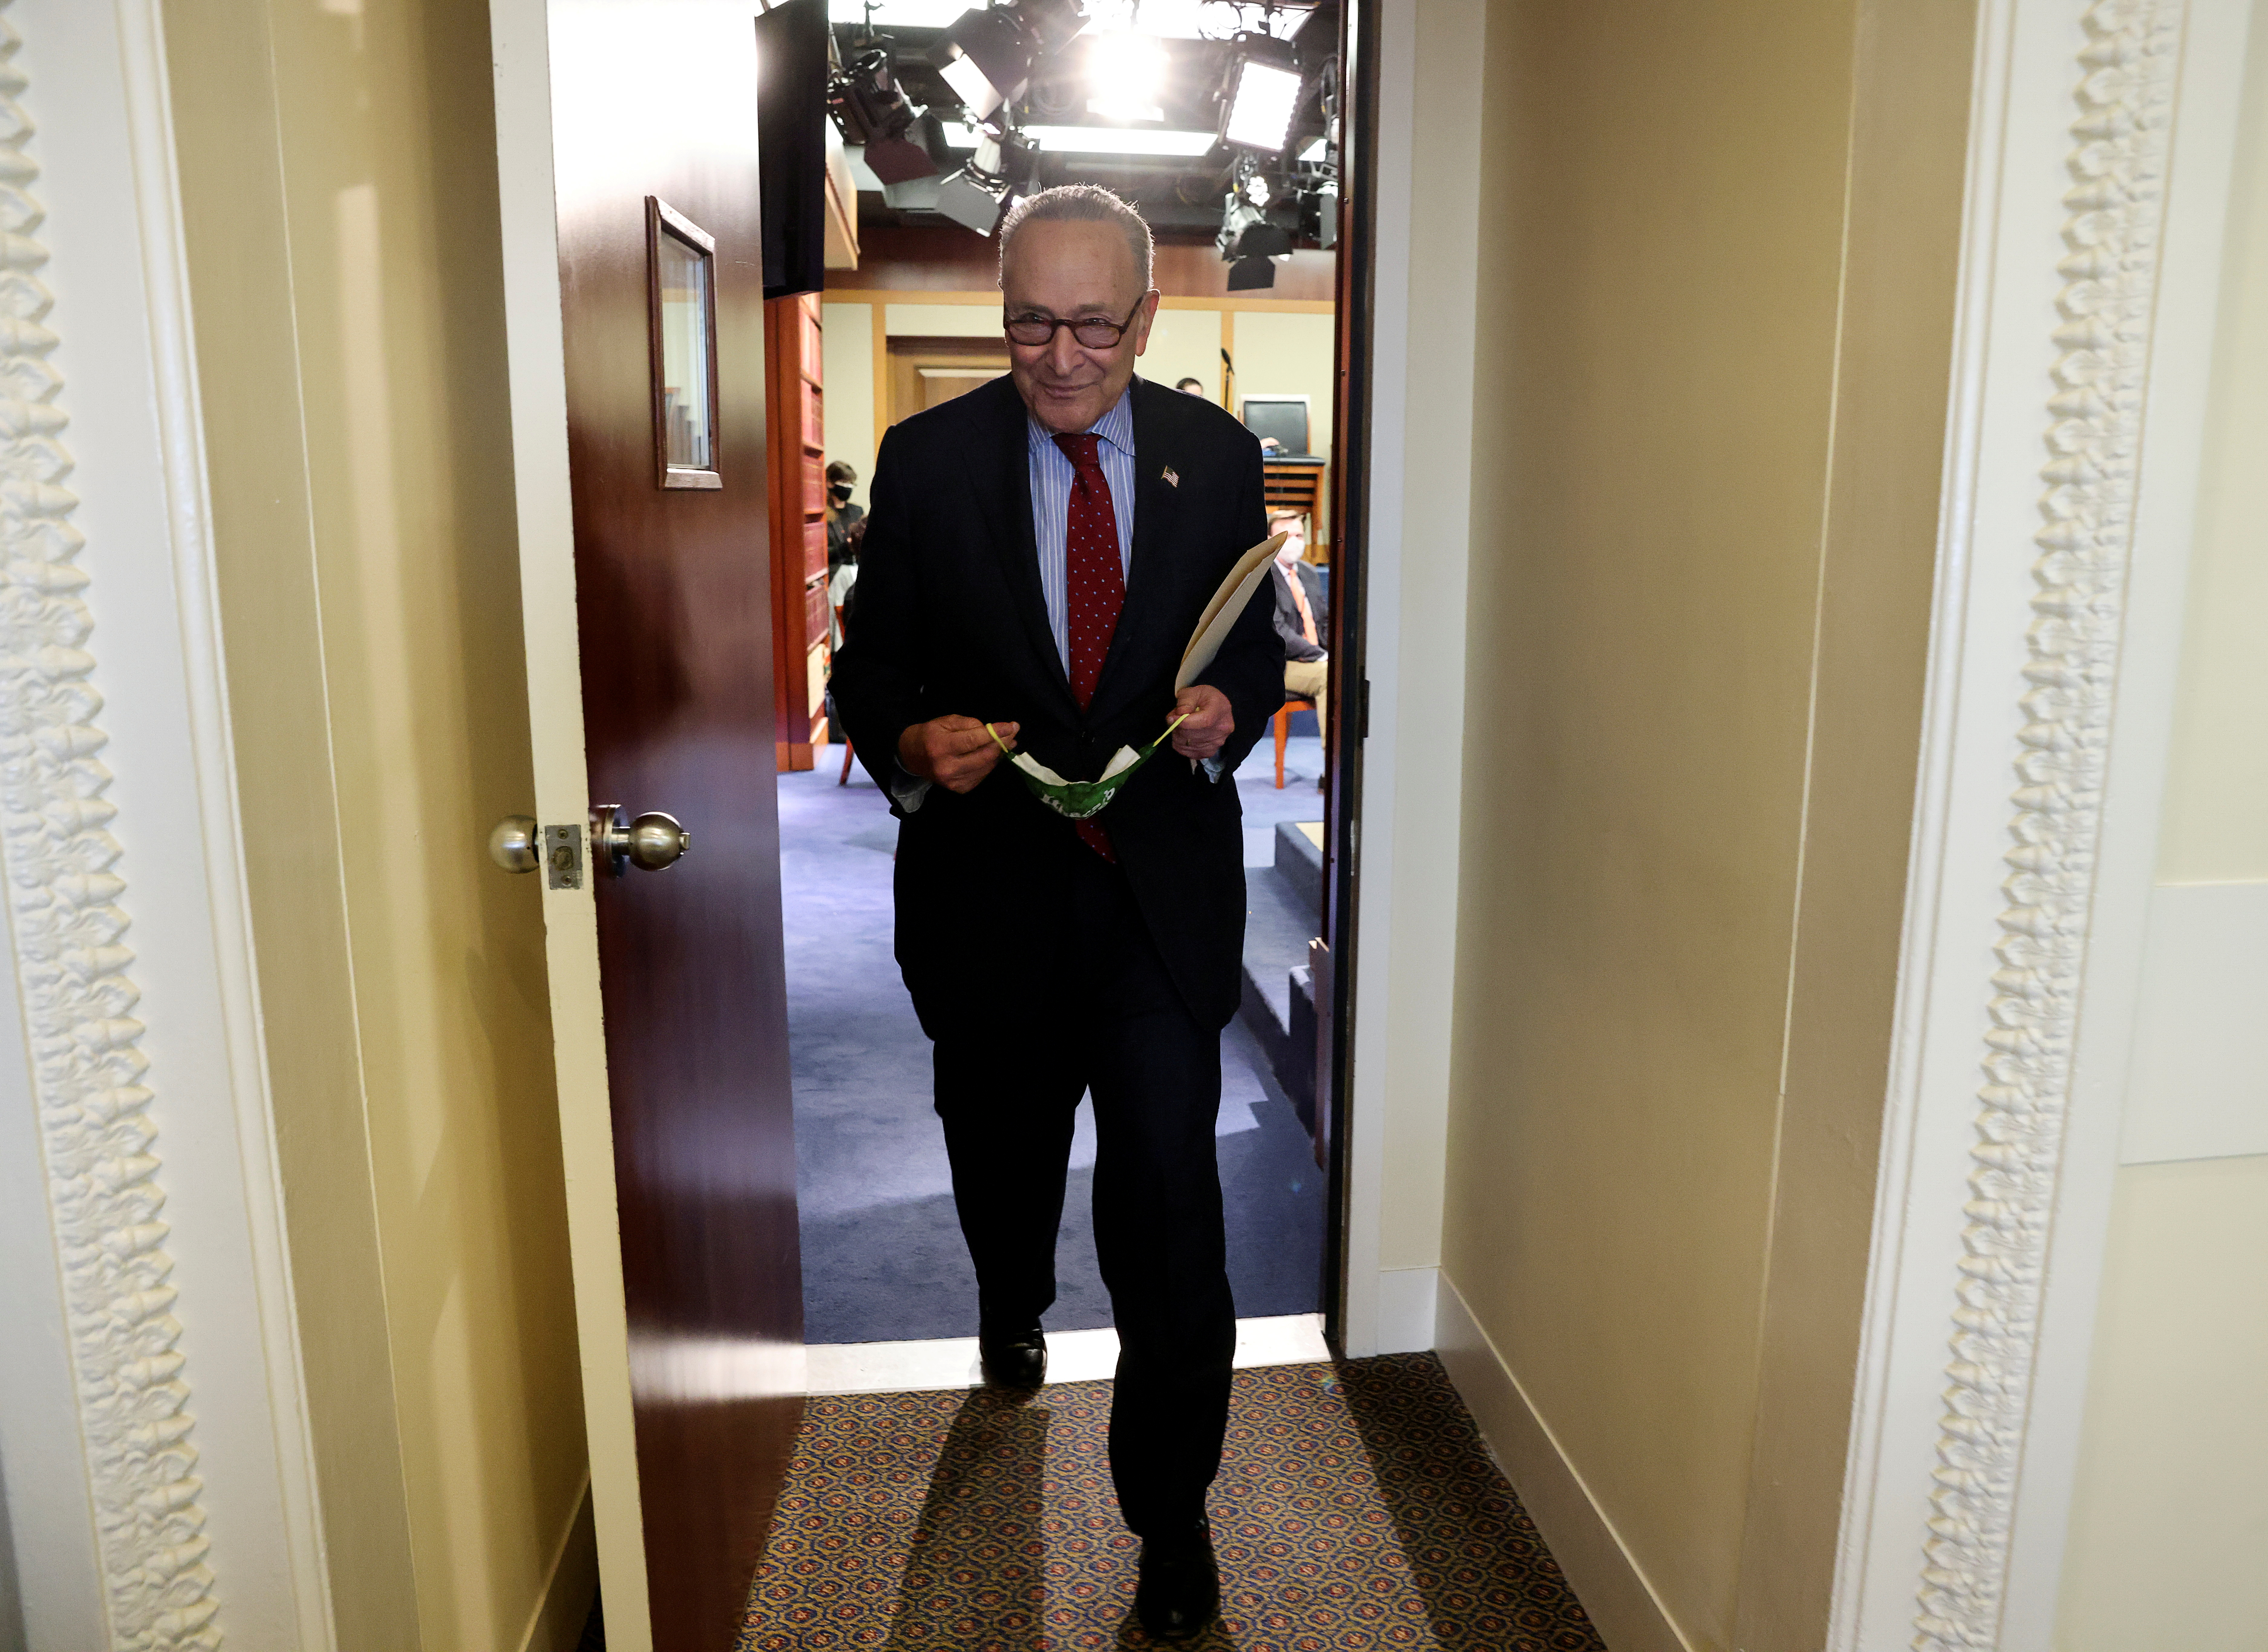 U.S. Senate Majority Leader Chuck Schumer (D-NY) departs after holding a news conference at the U.S. Capitol in Washington, U.S., March 25, 2021. REUTERS/Jonathan Ernst/Pool/File Photo